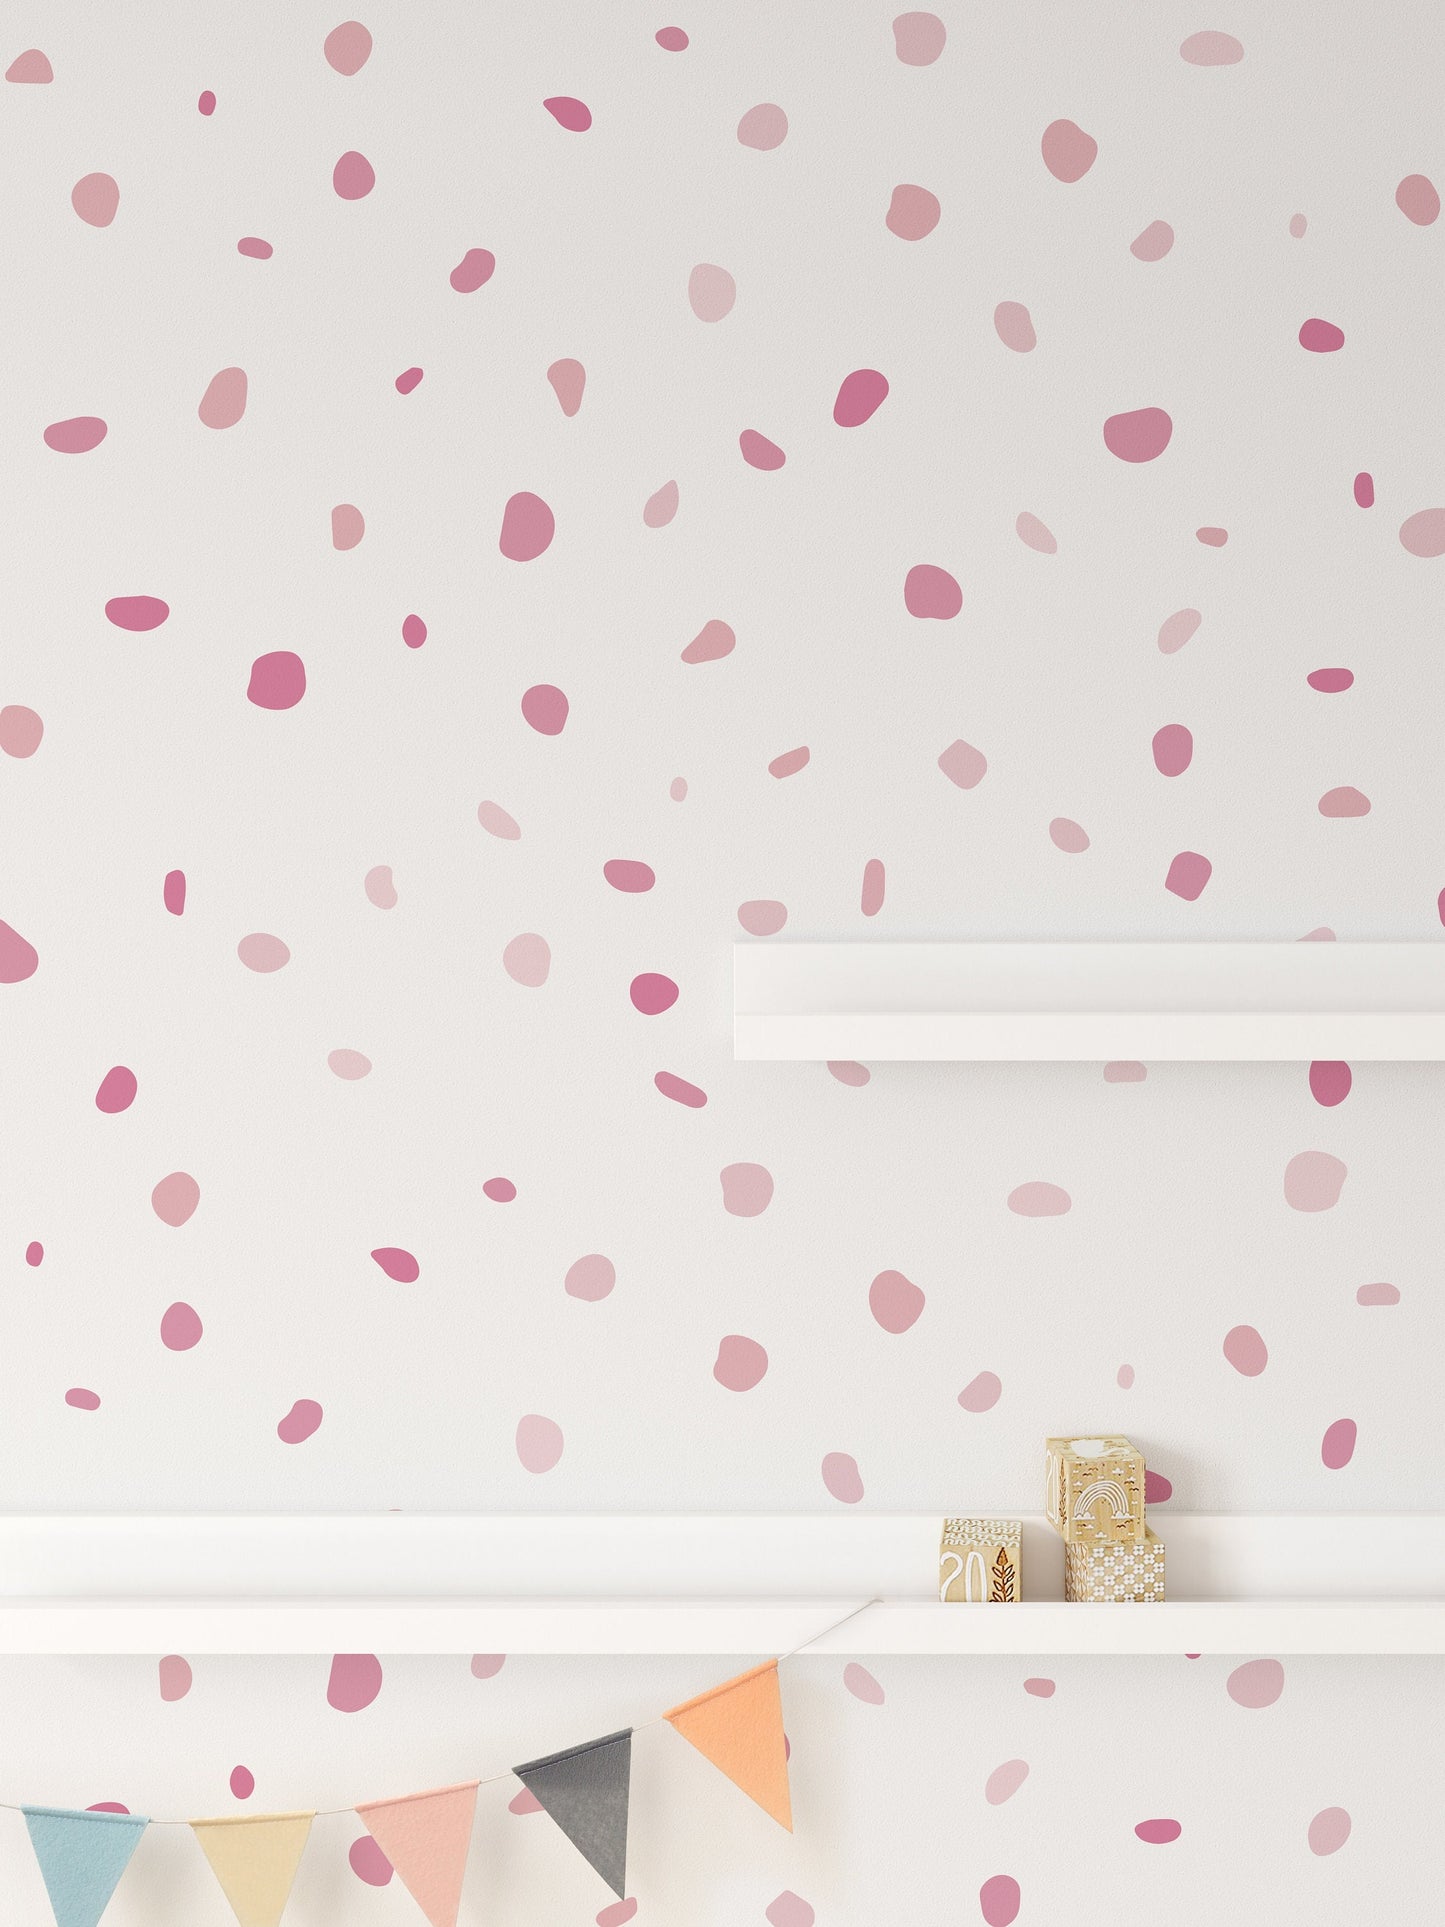 160 Pink Pastel Colour Polka Dot Wall Stickers